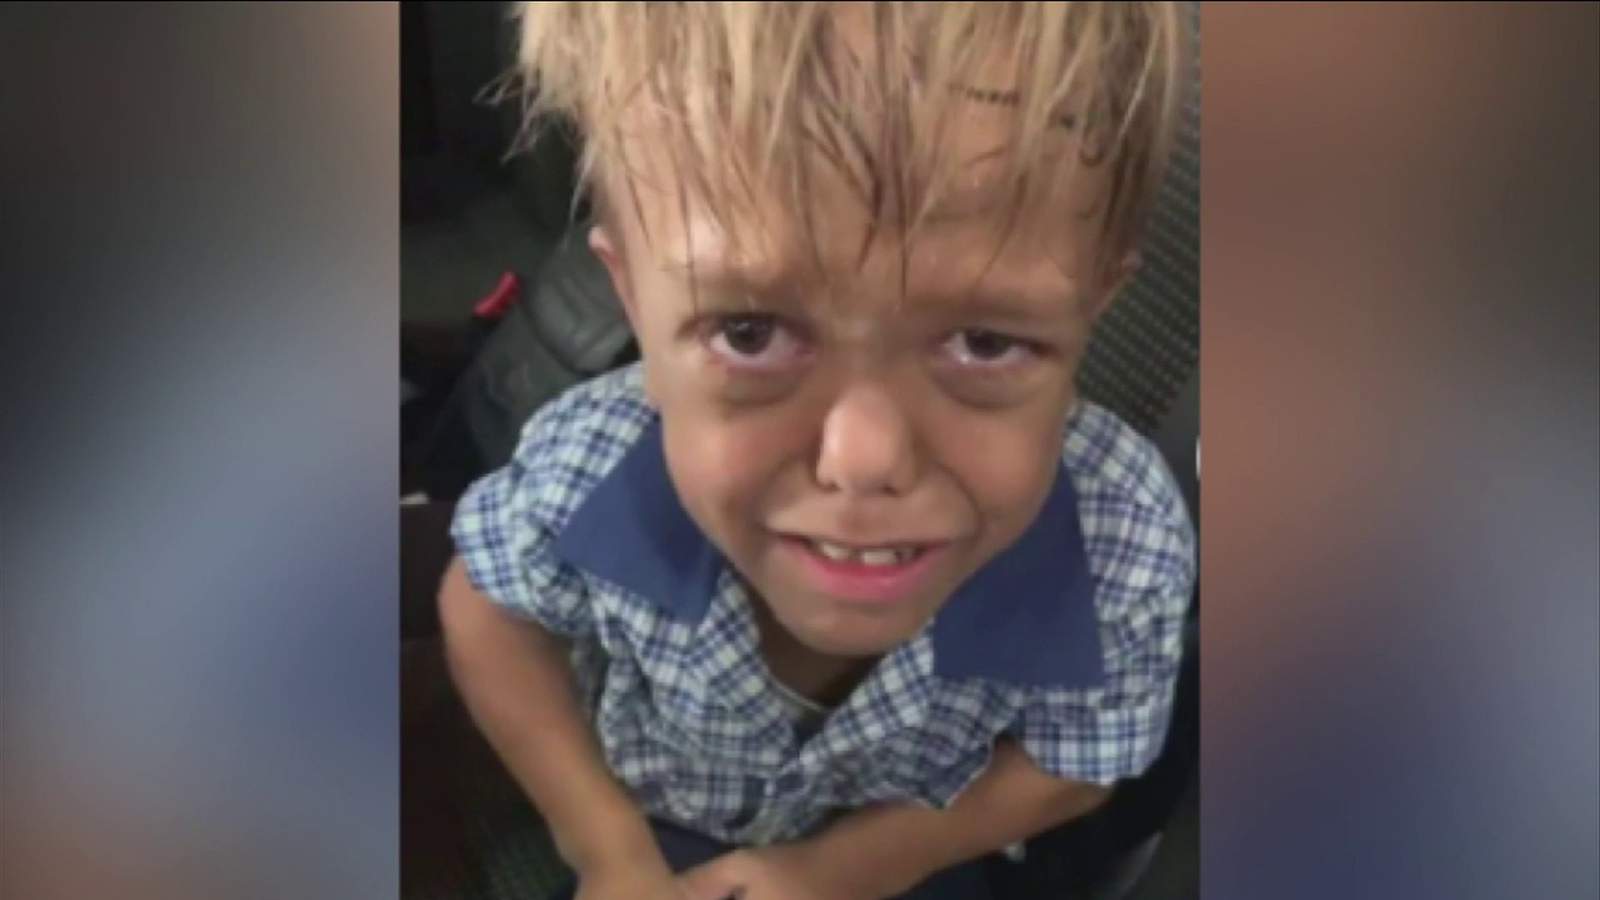 Mother’s heartbreaking video of son with dwarfism crying because of bullying goes viral